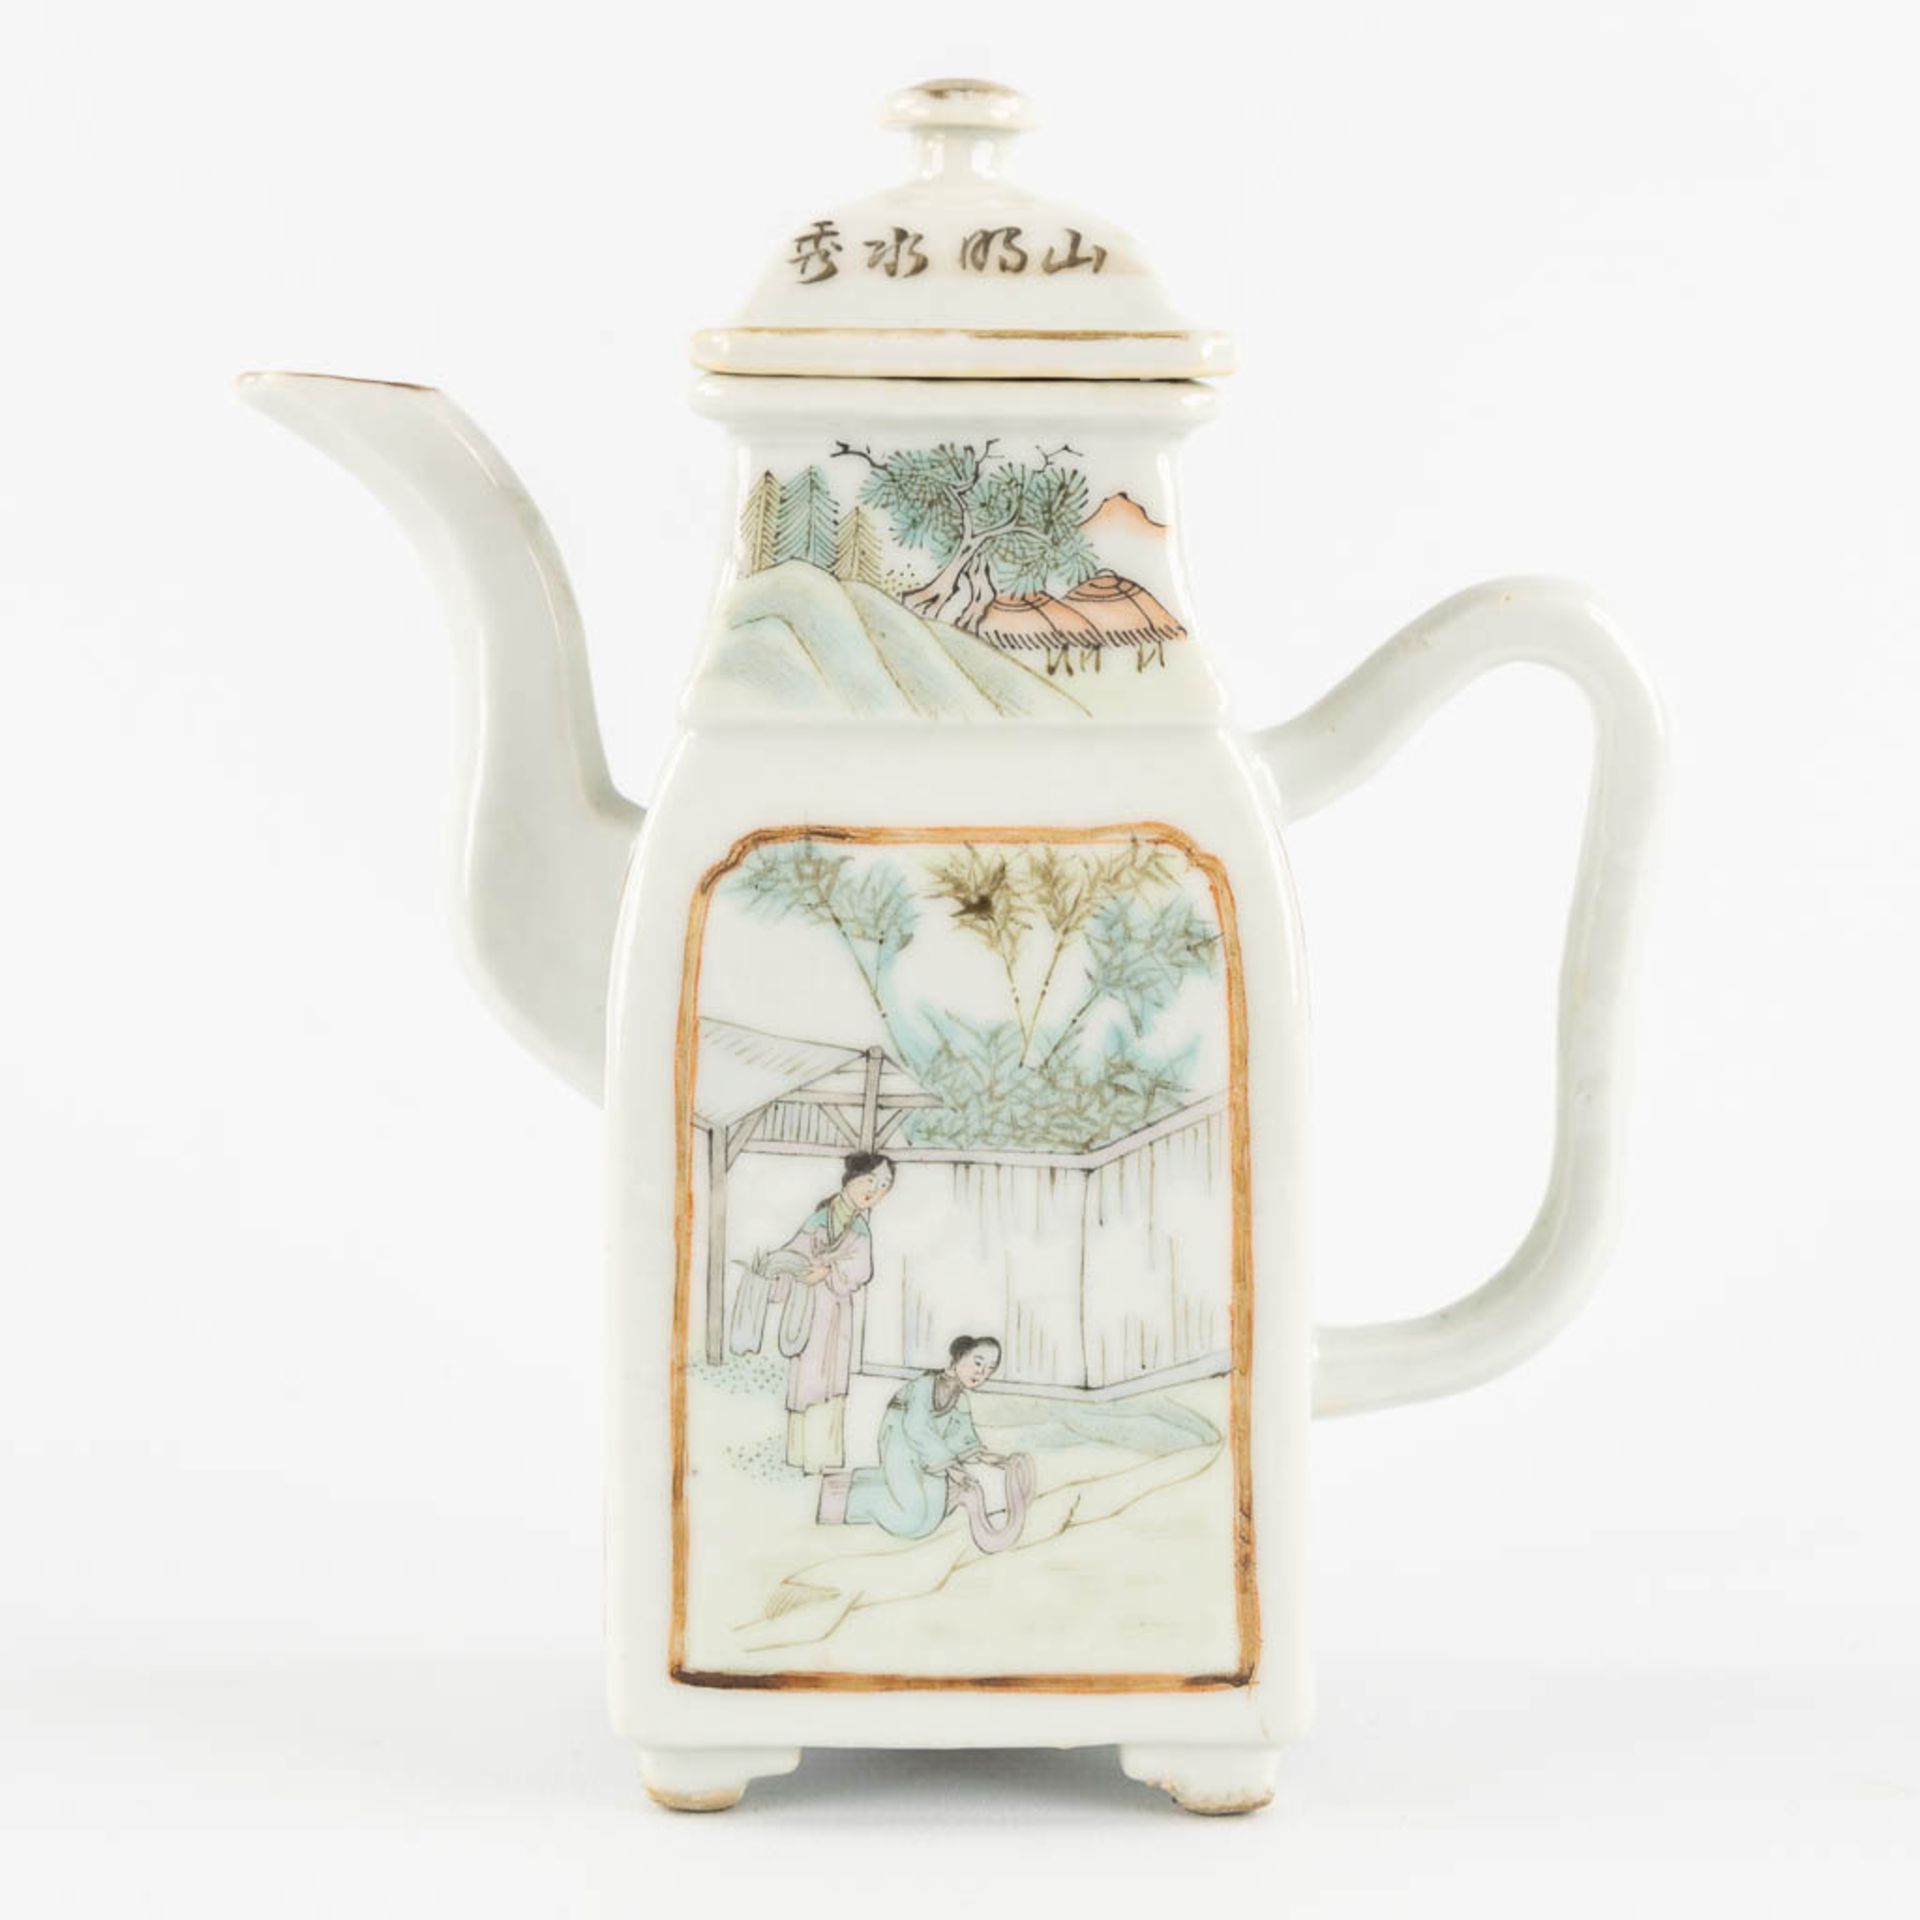 A Chinese pair of plates and a teapot. Decorated with Foo Lions and Figurines. (H:18 cm) - Image 7 of 15